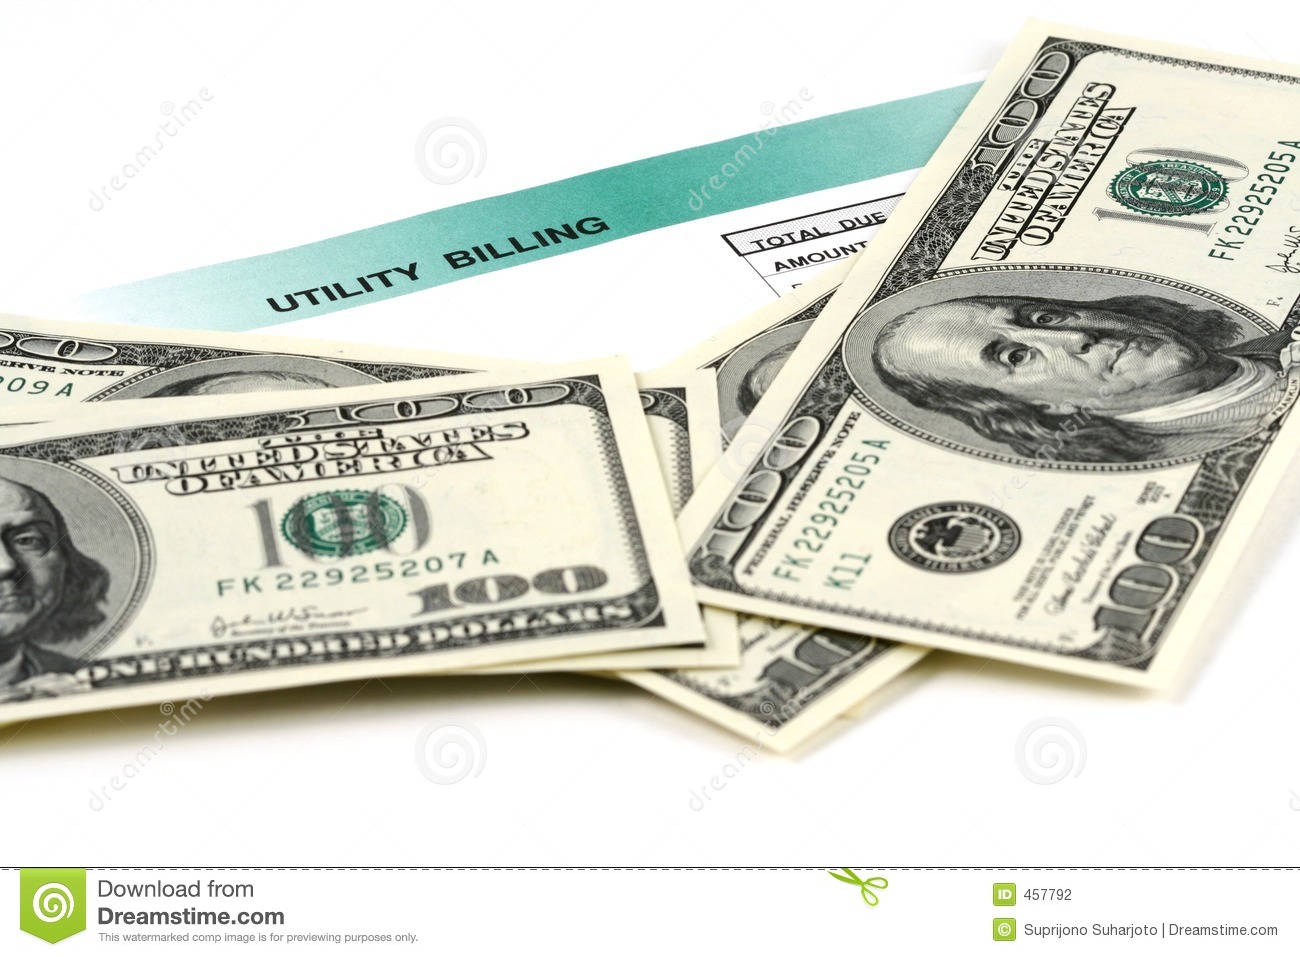 Utility Bill Stock Photography   Image  457792